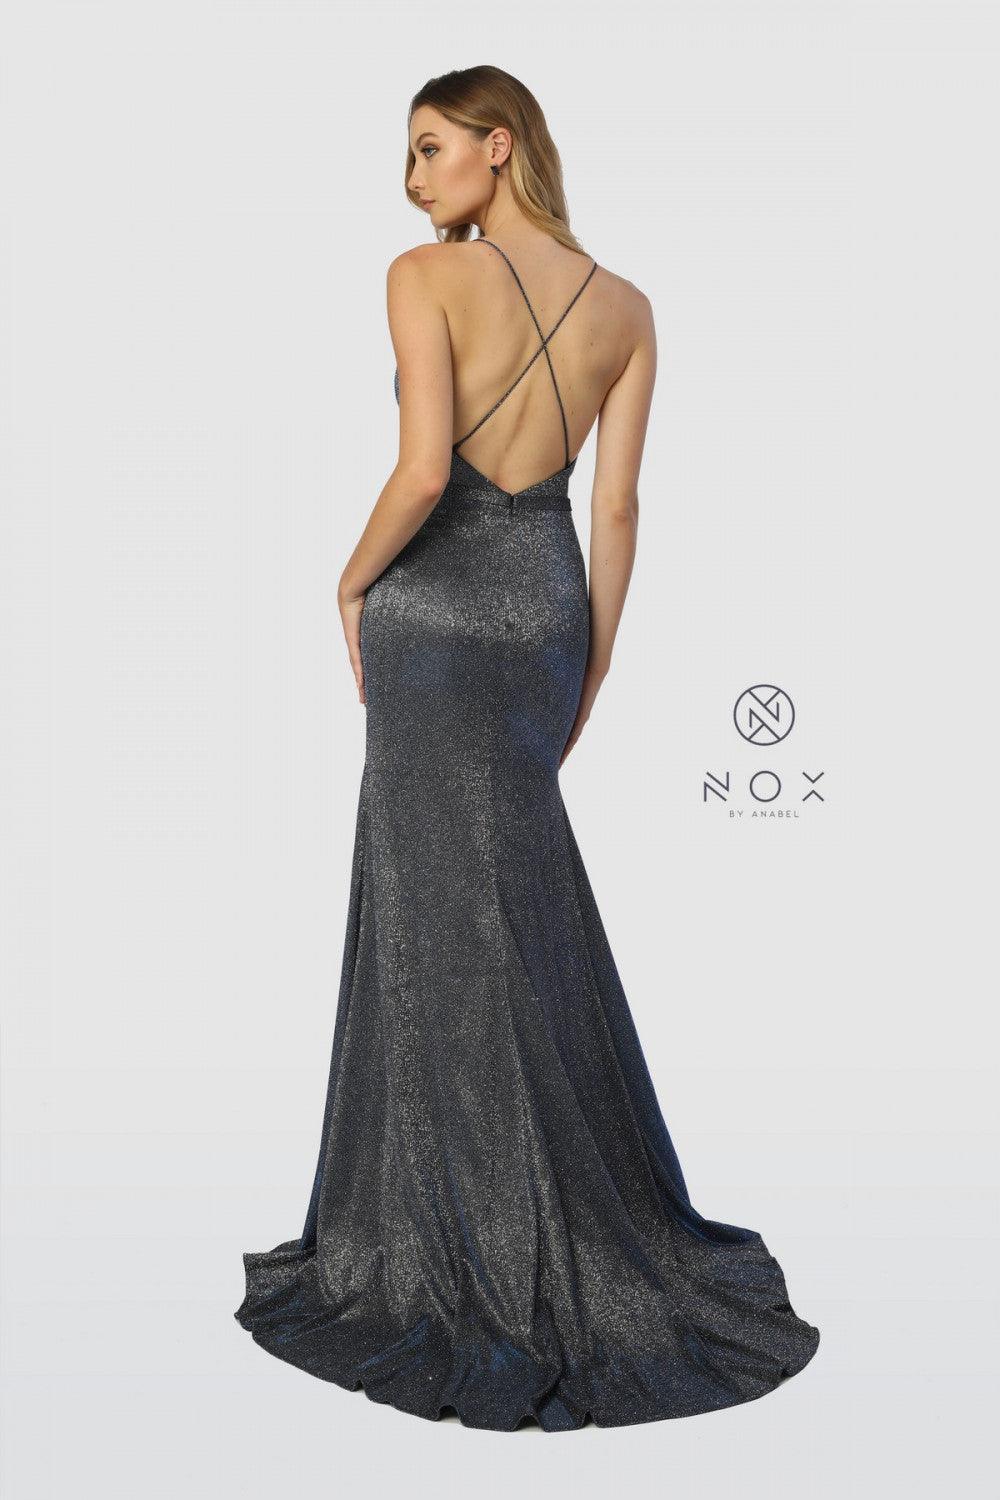 Long Metallic Open Back Prom Dress Evening Gown - The Dress Outlet Nox Anabel